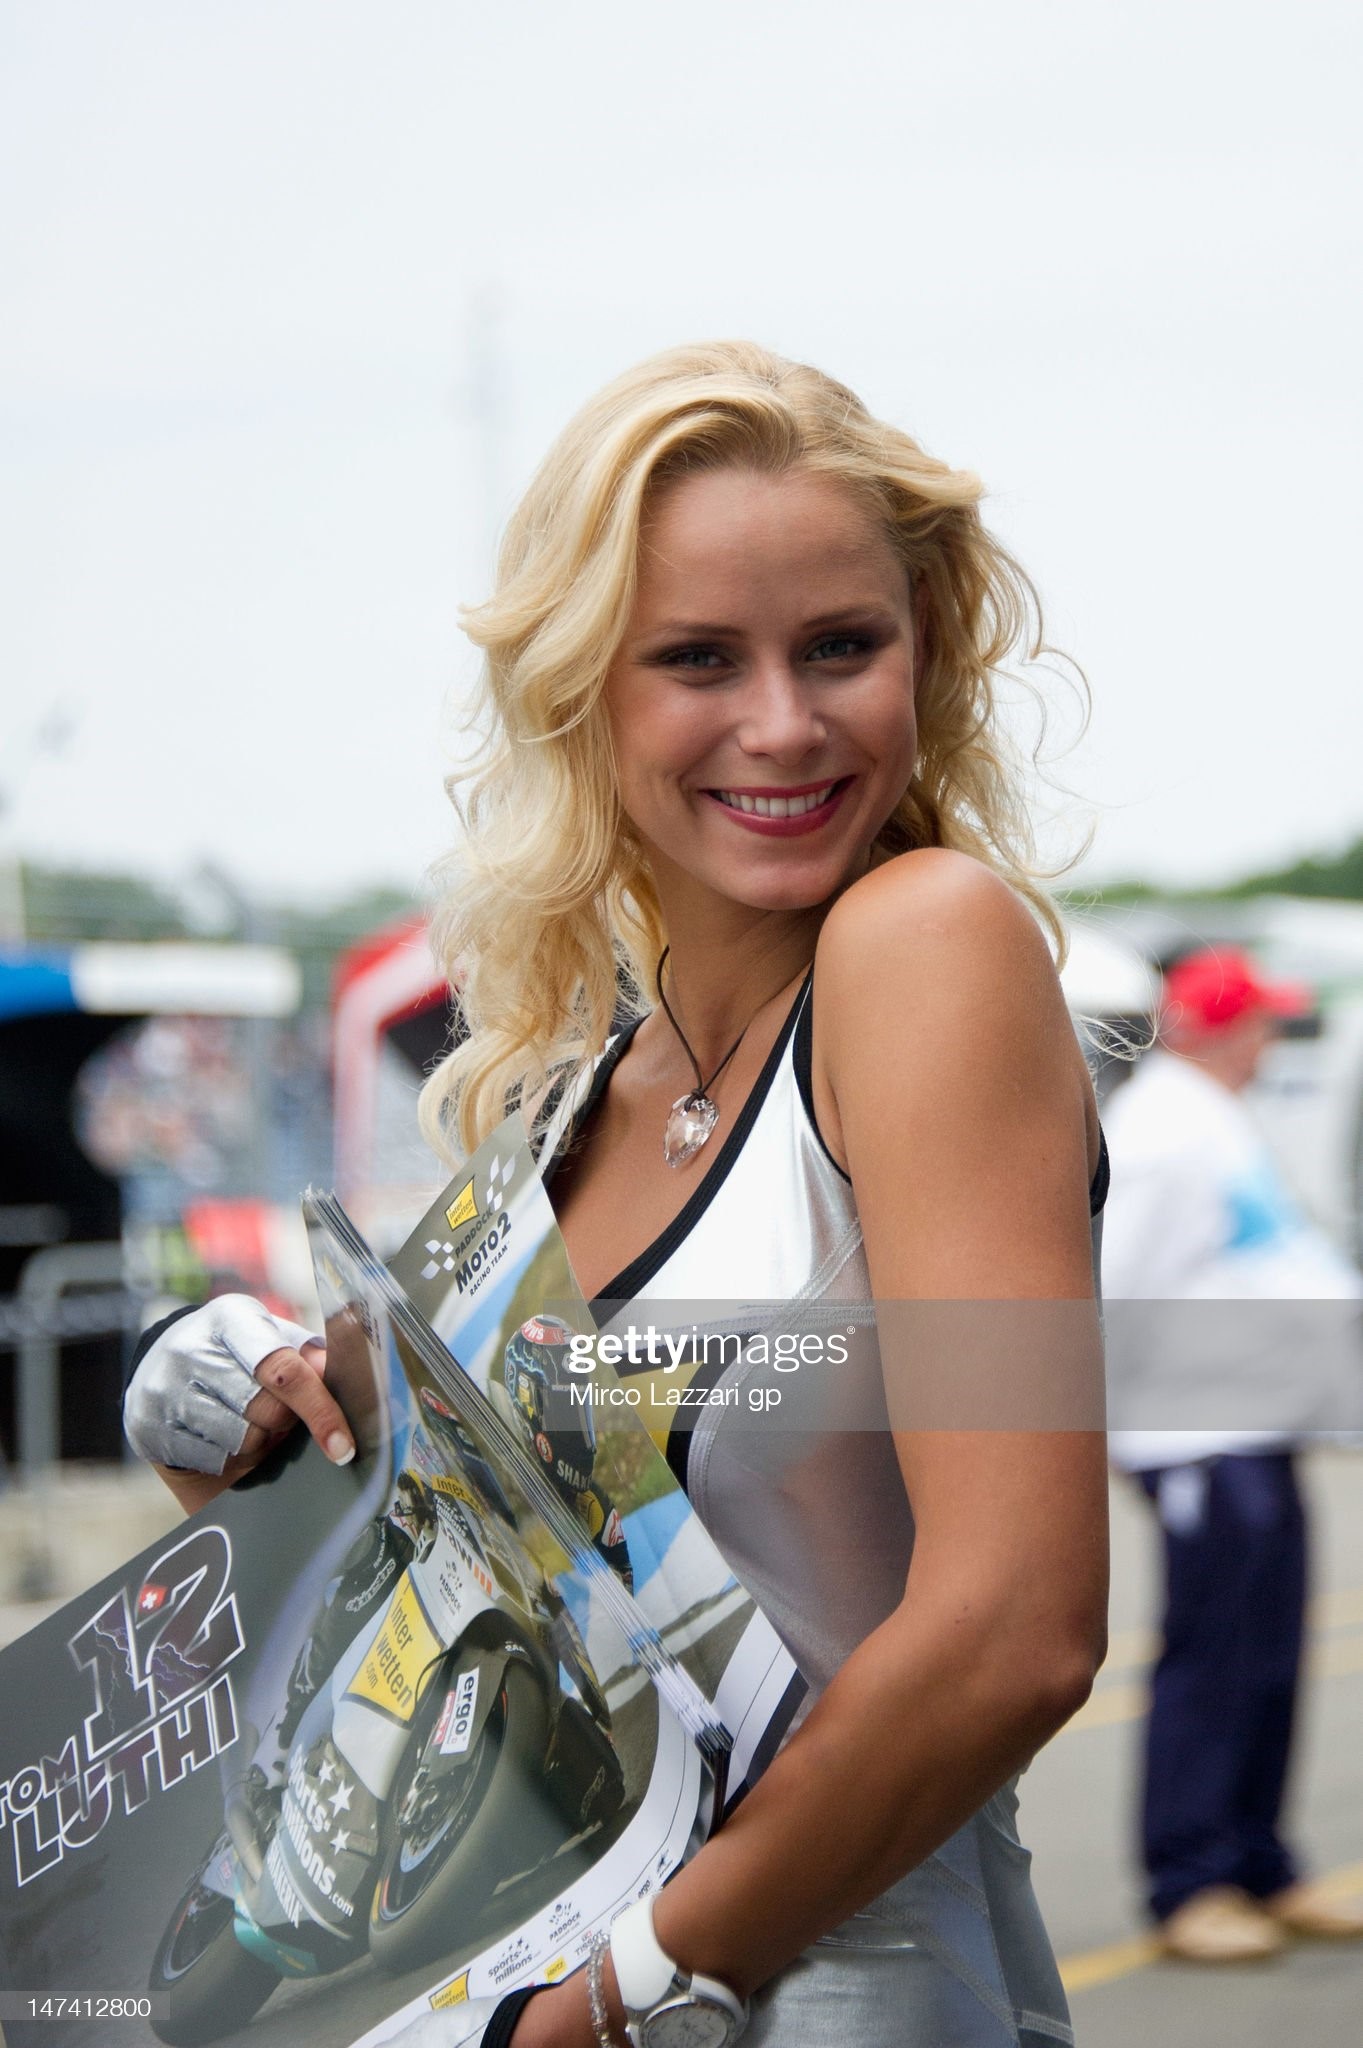 A grid girl poses and smiles at the pits during the qualifying practice of the MotoGp at TT Circuit Assen on June 29, 2012 in Assen, Netherlands. 